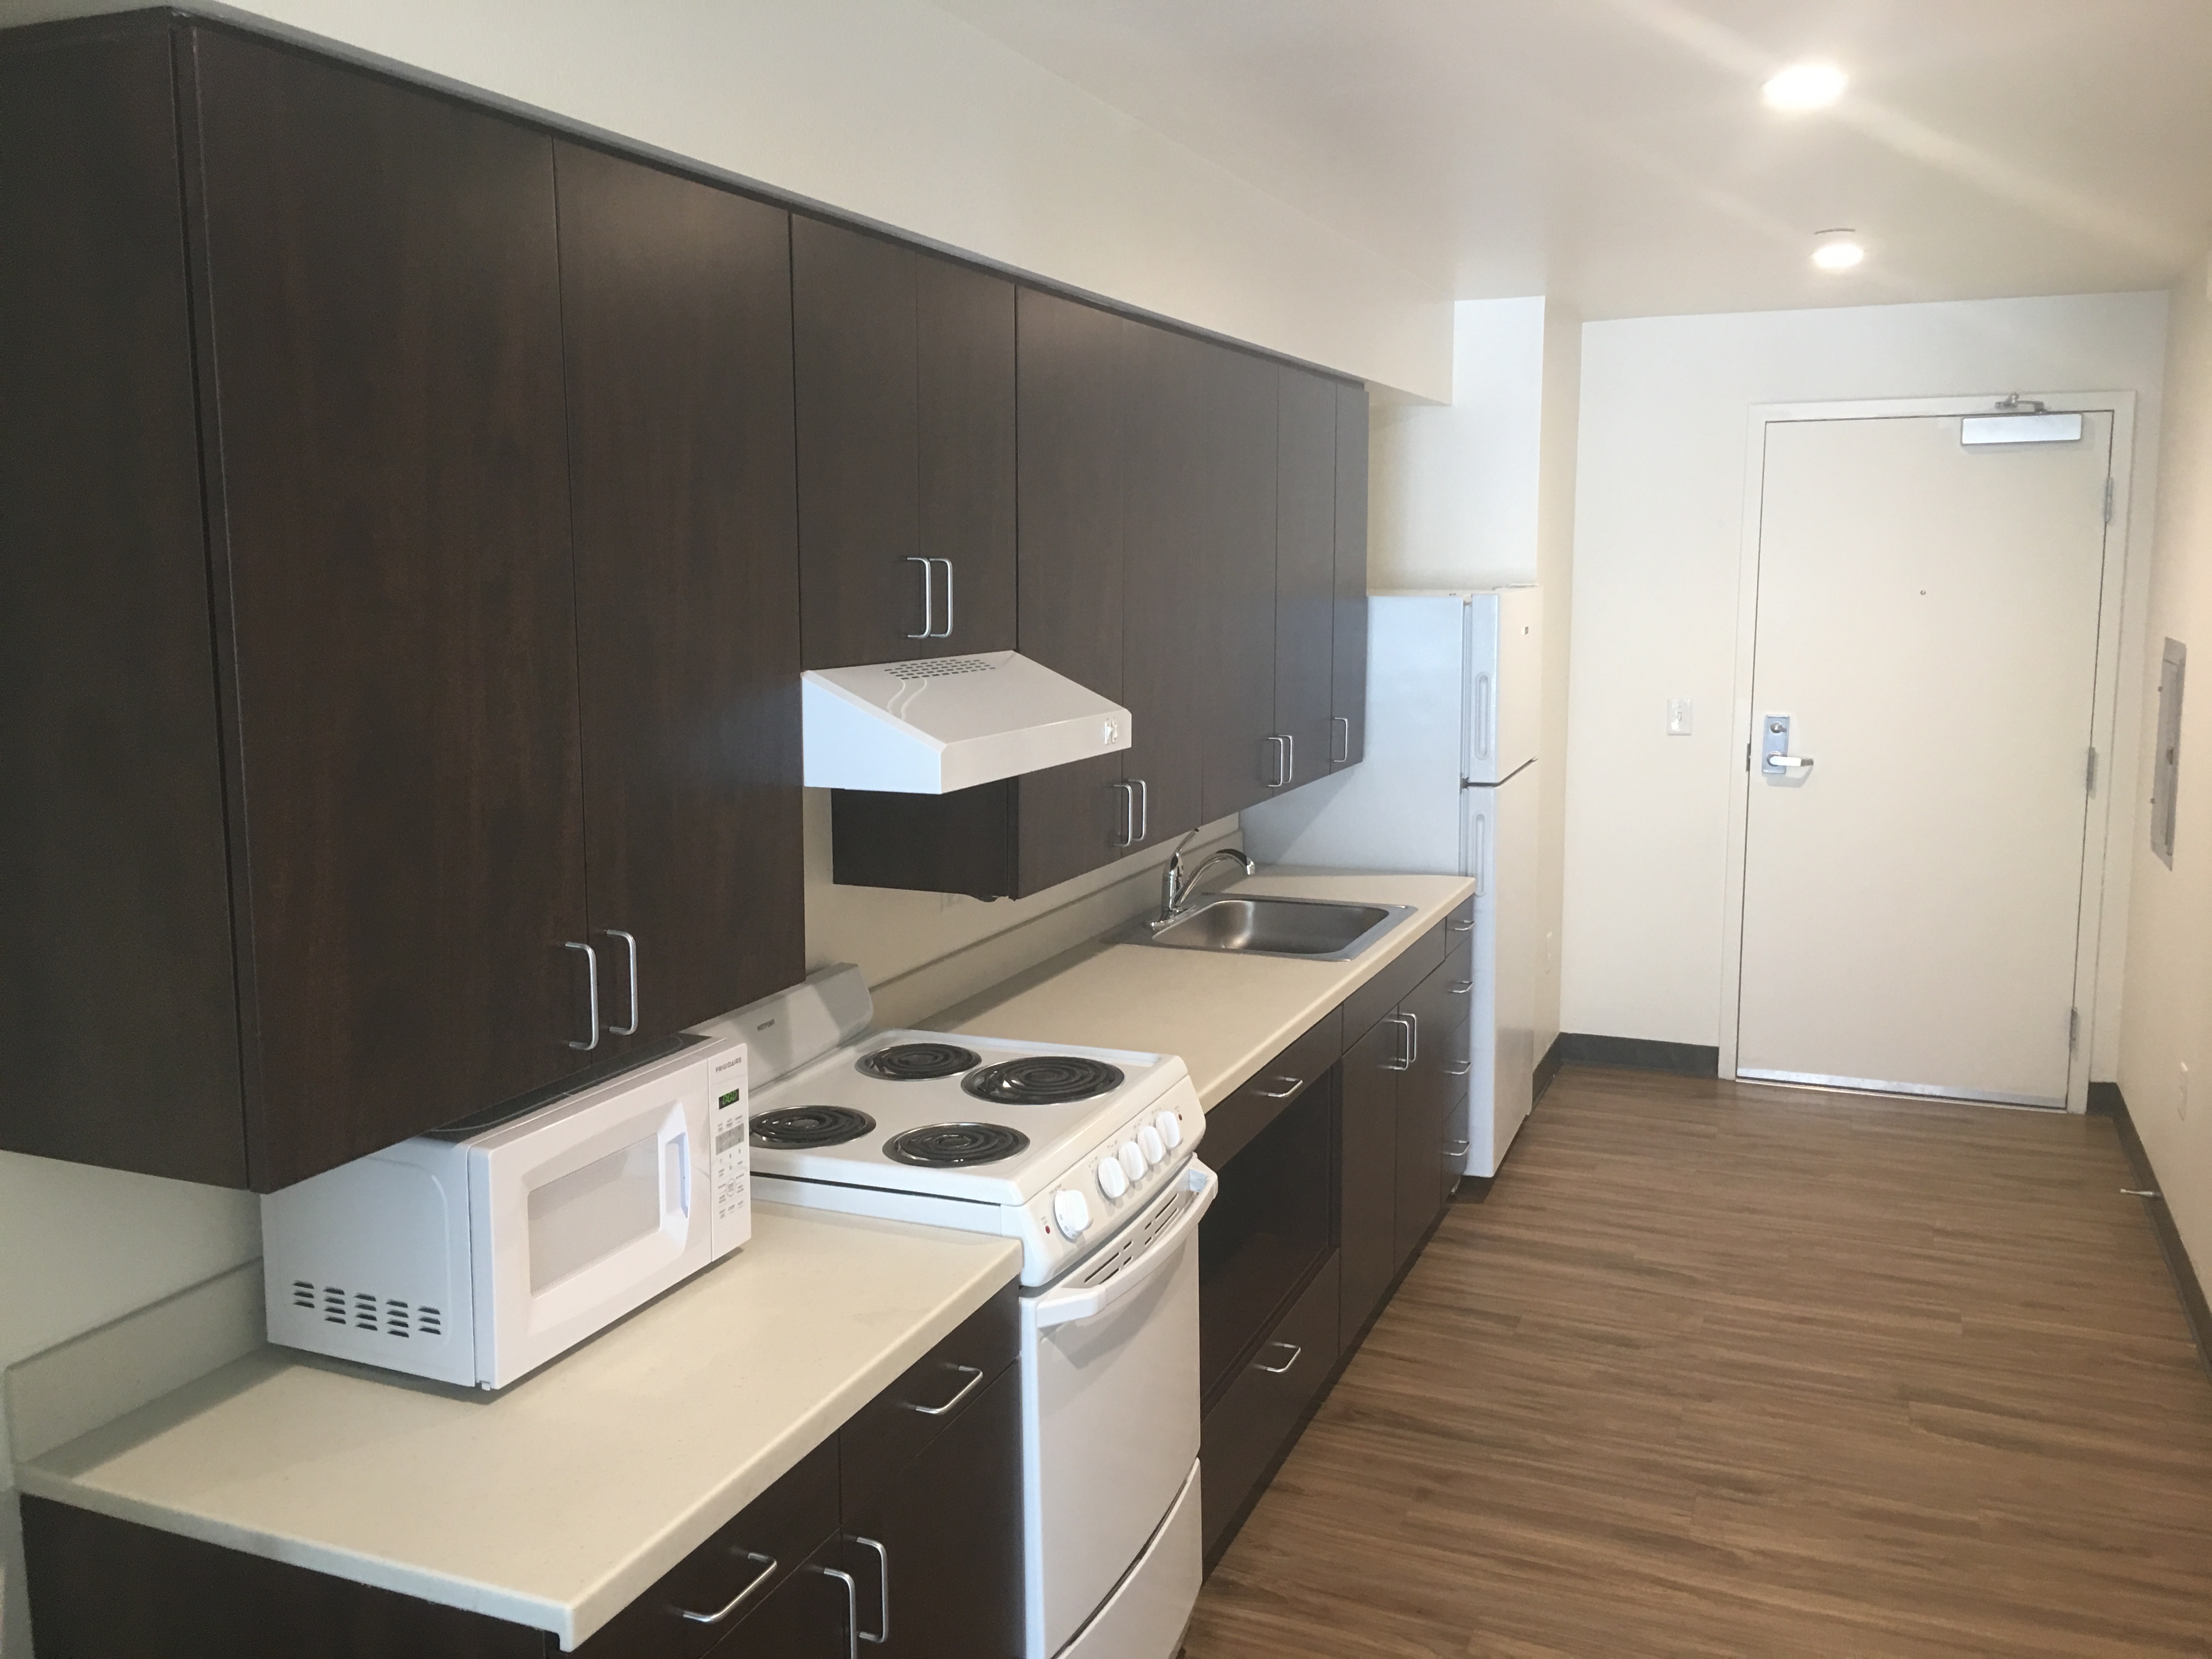 Interior view of a kitchen in a unit at the PSH Campus. Dark brown cabinets with white countertops, microwave, stove and refrigerator.